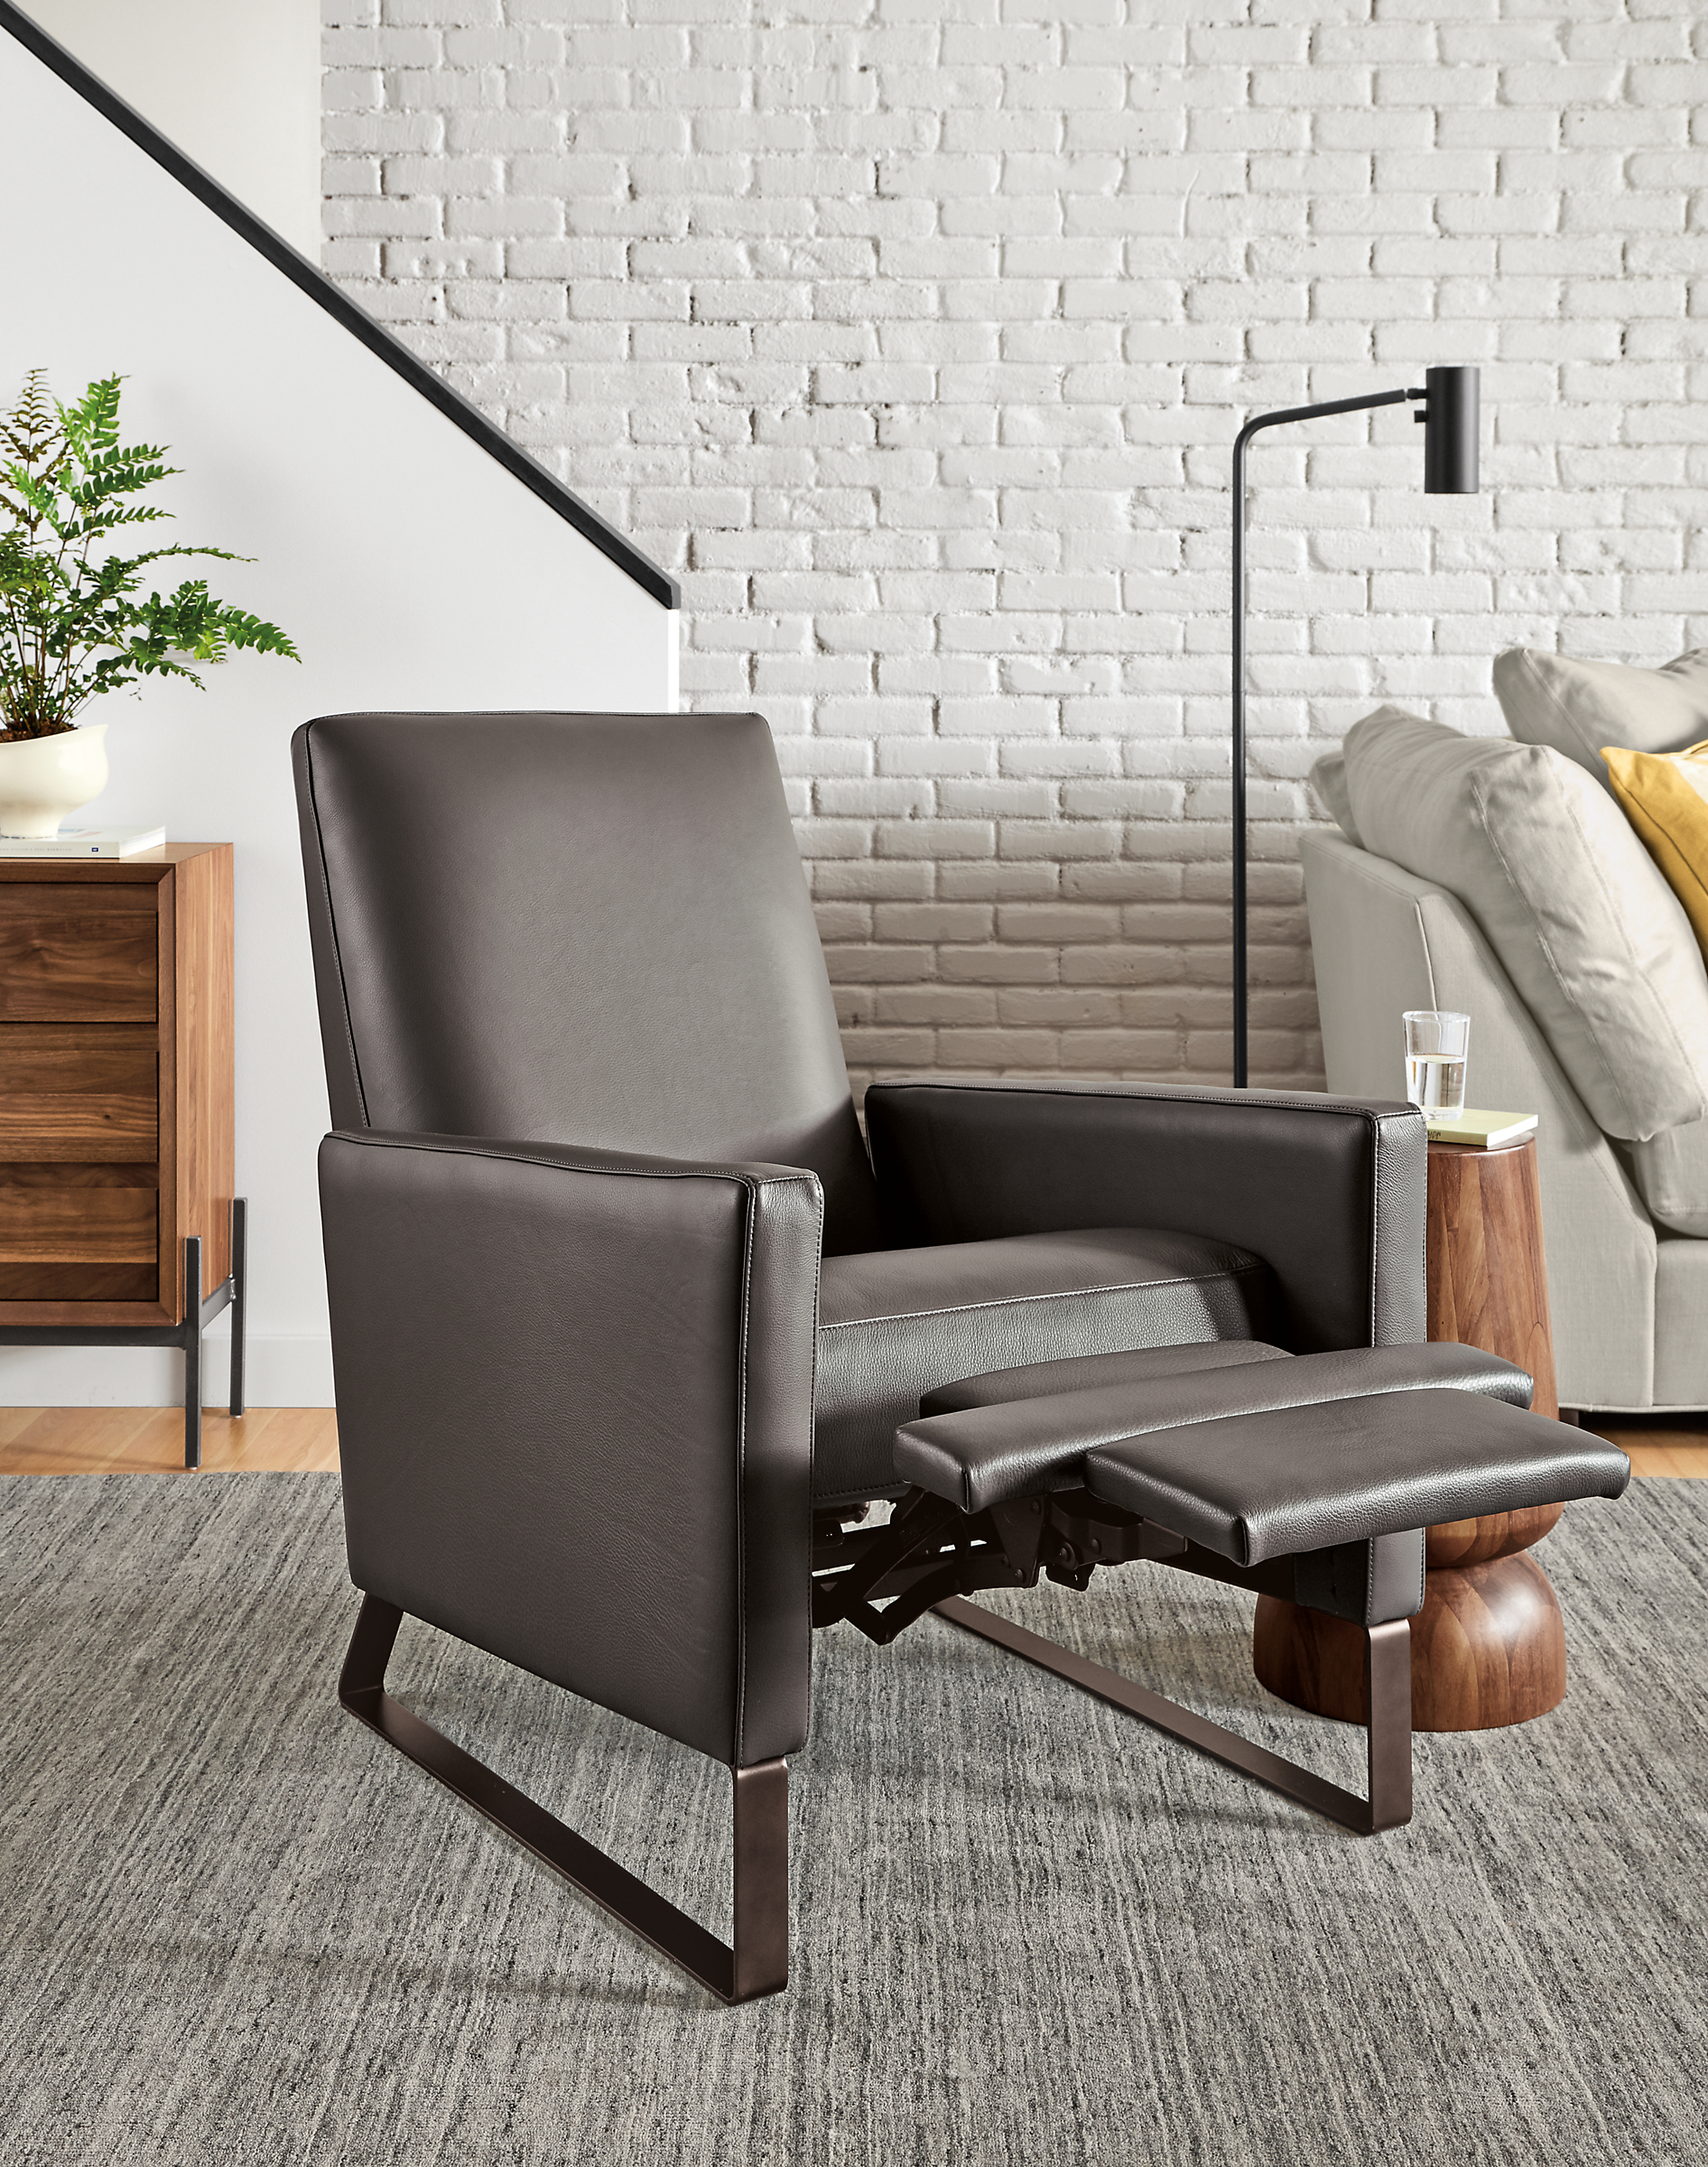 Detail of Arlo Thin-Arm Recliner in Urbino Smoke Leather with steel sled  base with foot rest extended.